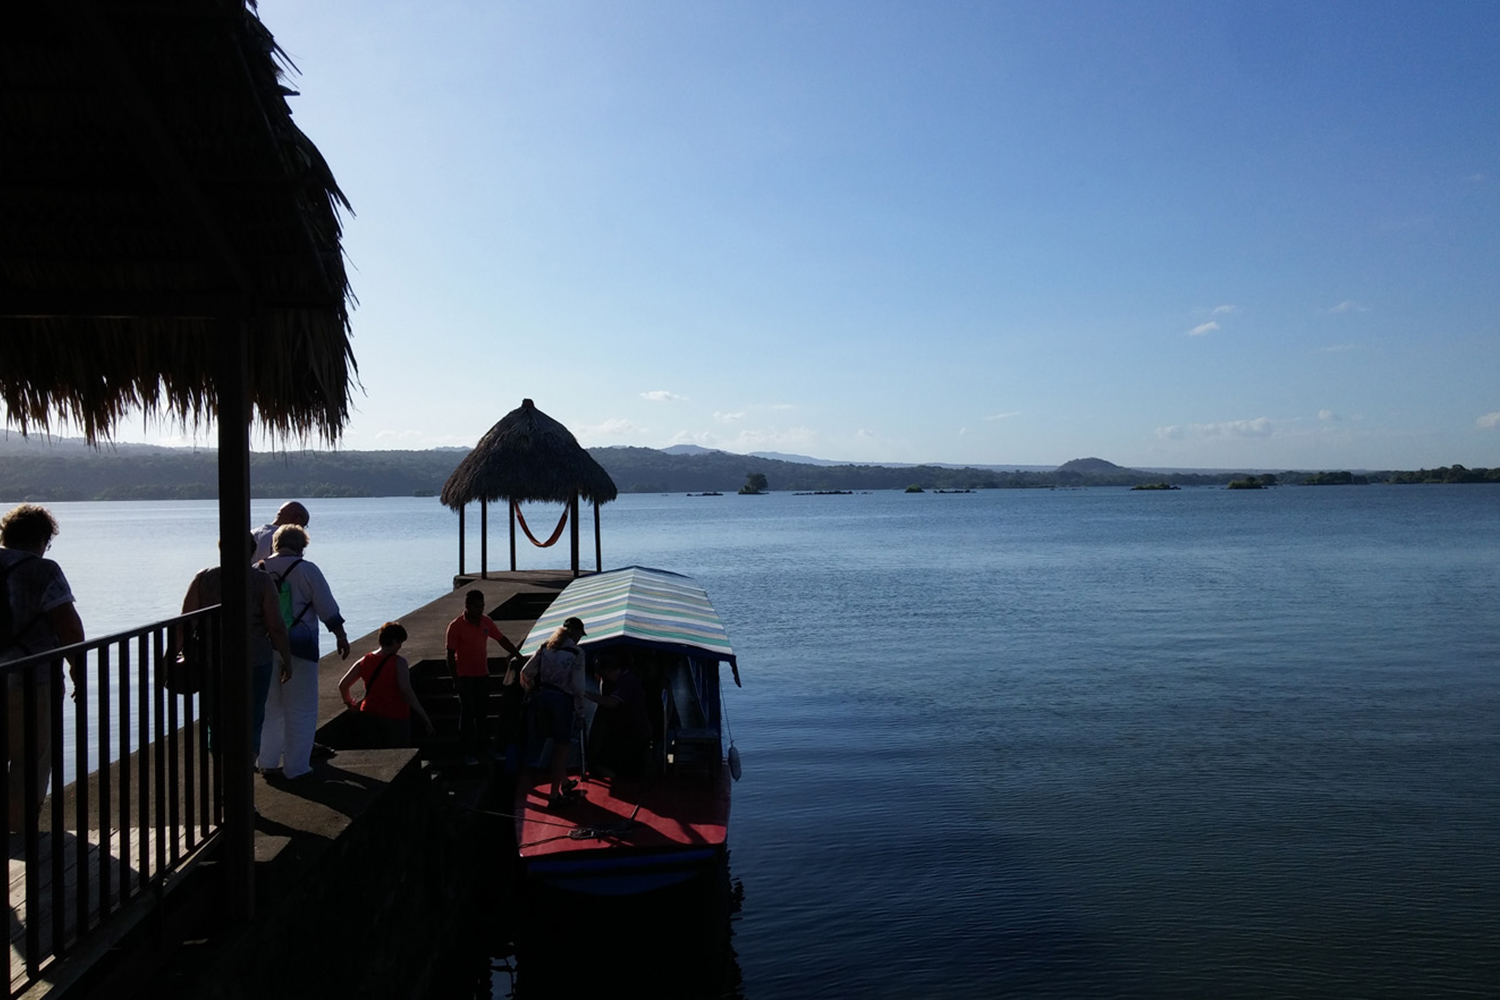 Day 2. Boarding boat to explore the Islets in Lake Nicaragua.